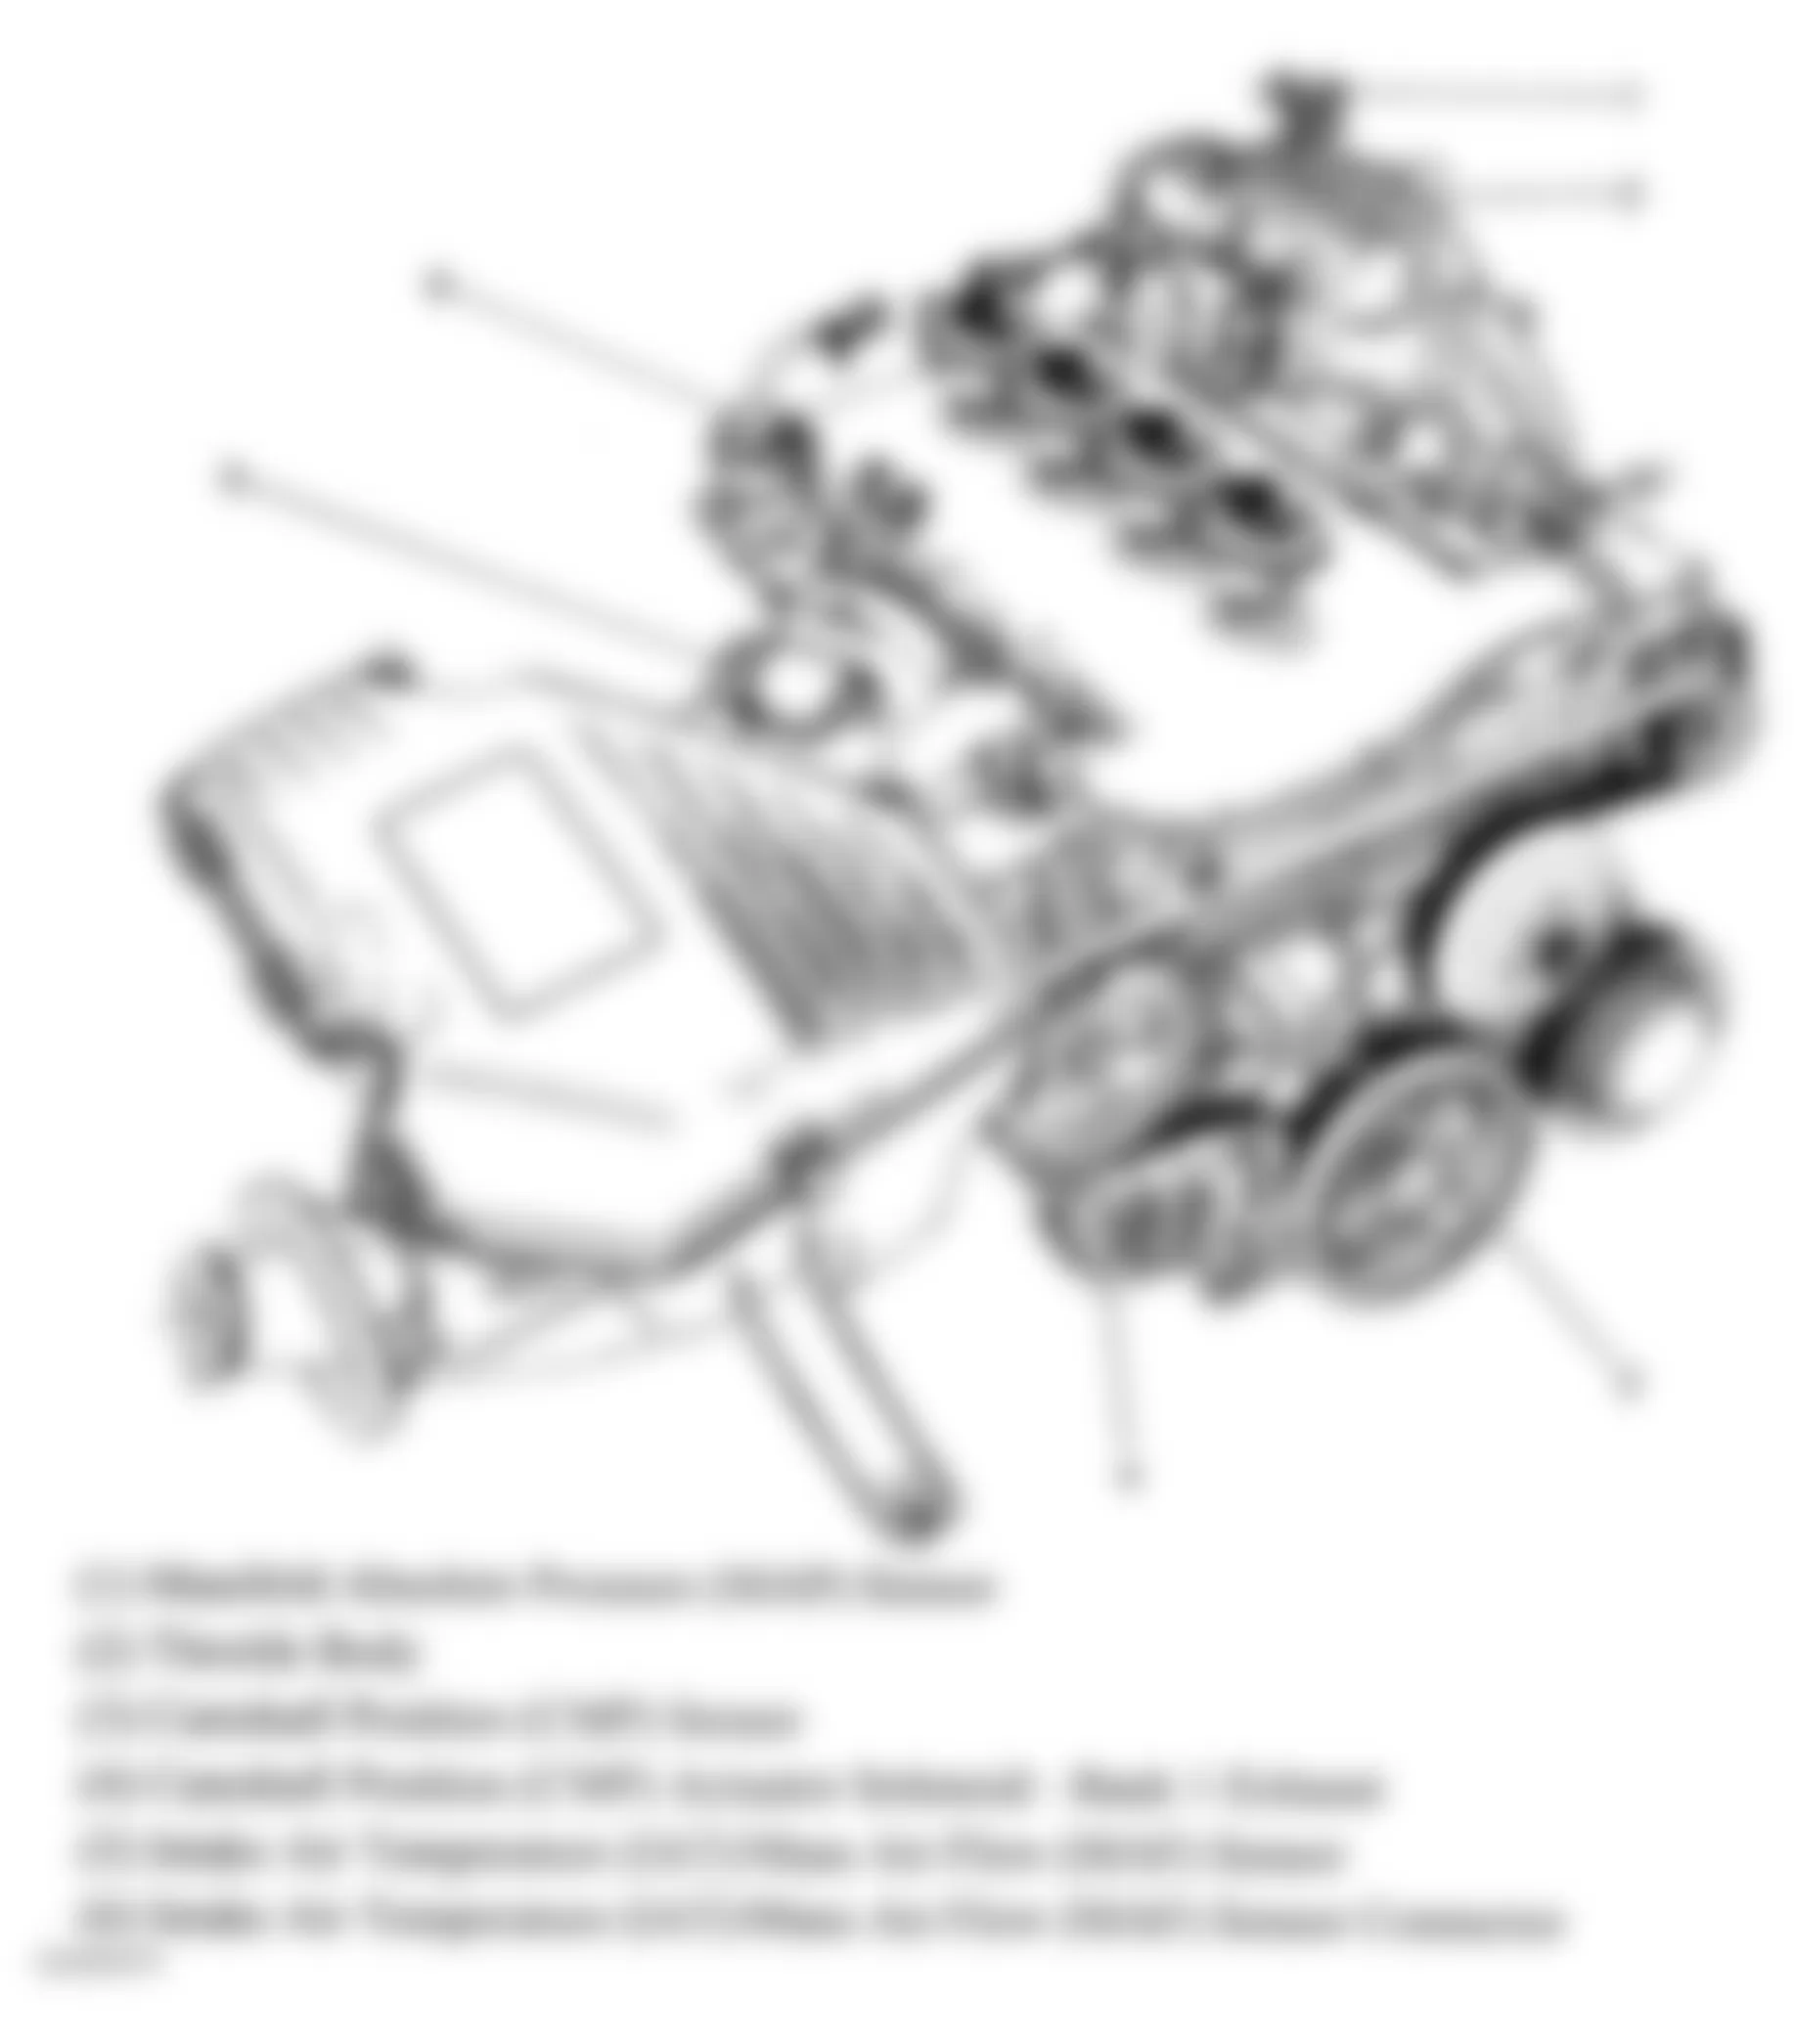 Isuzu i-290 S 2008 - Component Locations -  Top/Front View Of Engine (2.9L)